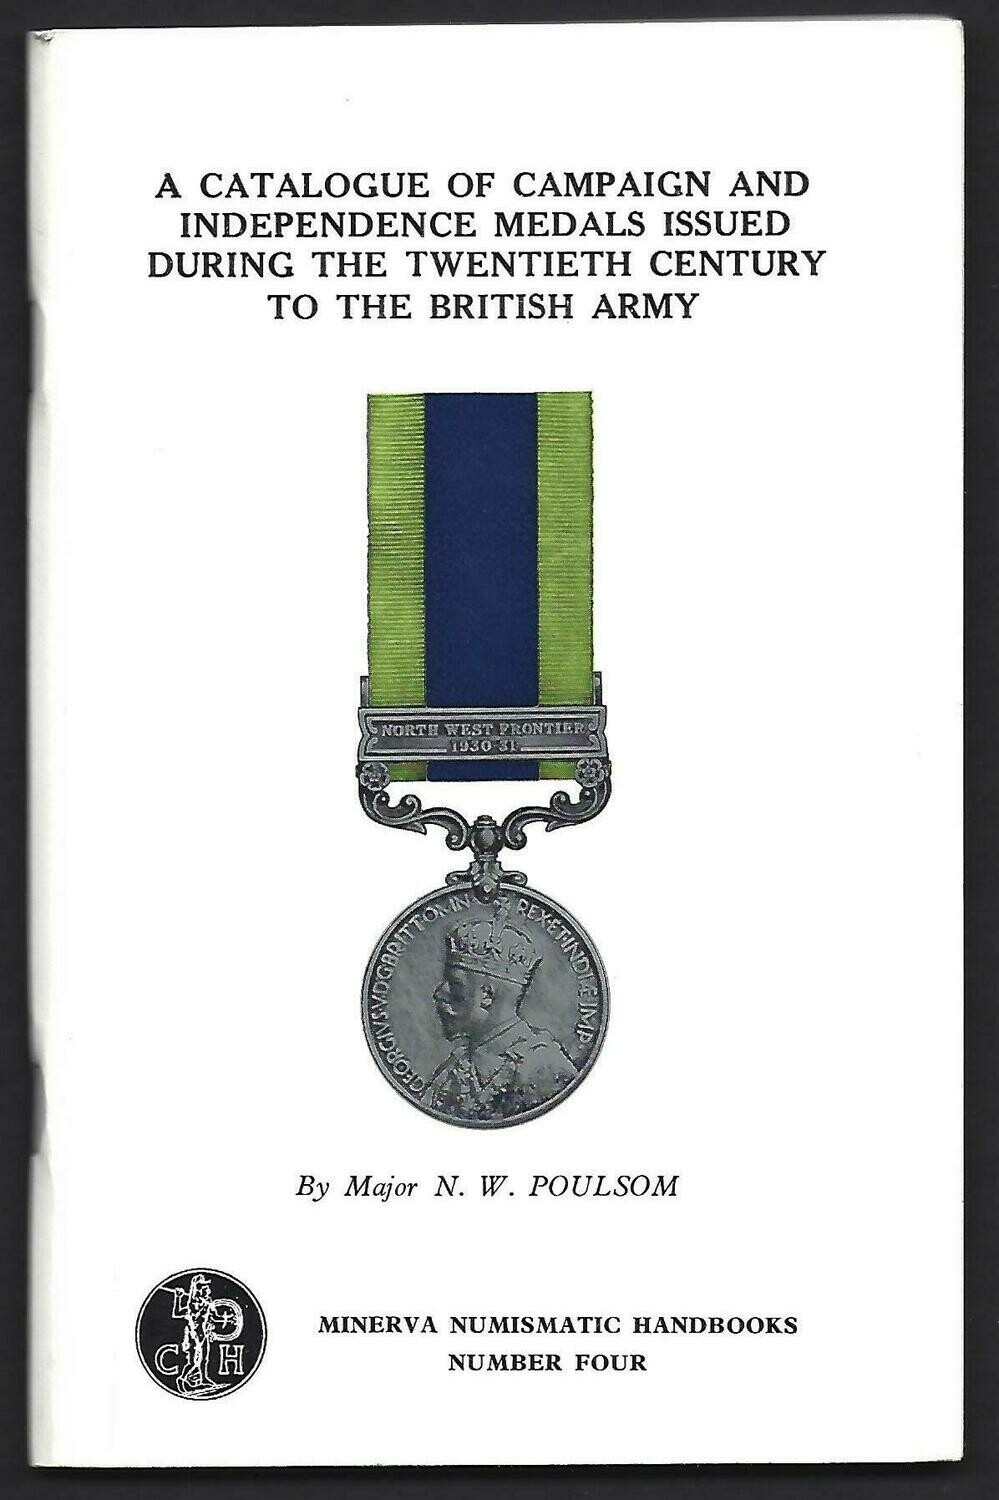 British; N.W. Poulsom, "A Catalogue of Campaign and Independence Medals issued during the Twentieth Century to the British Army."